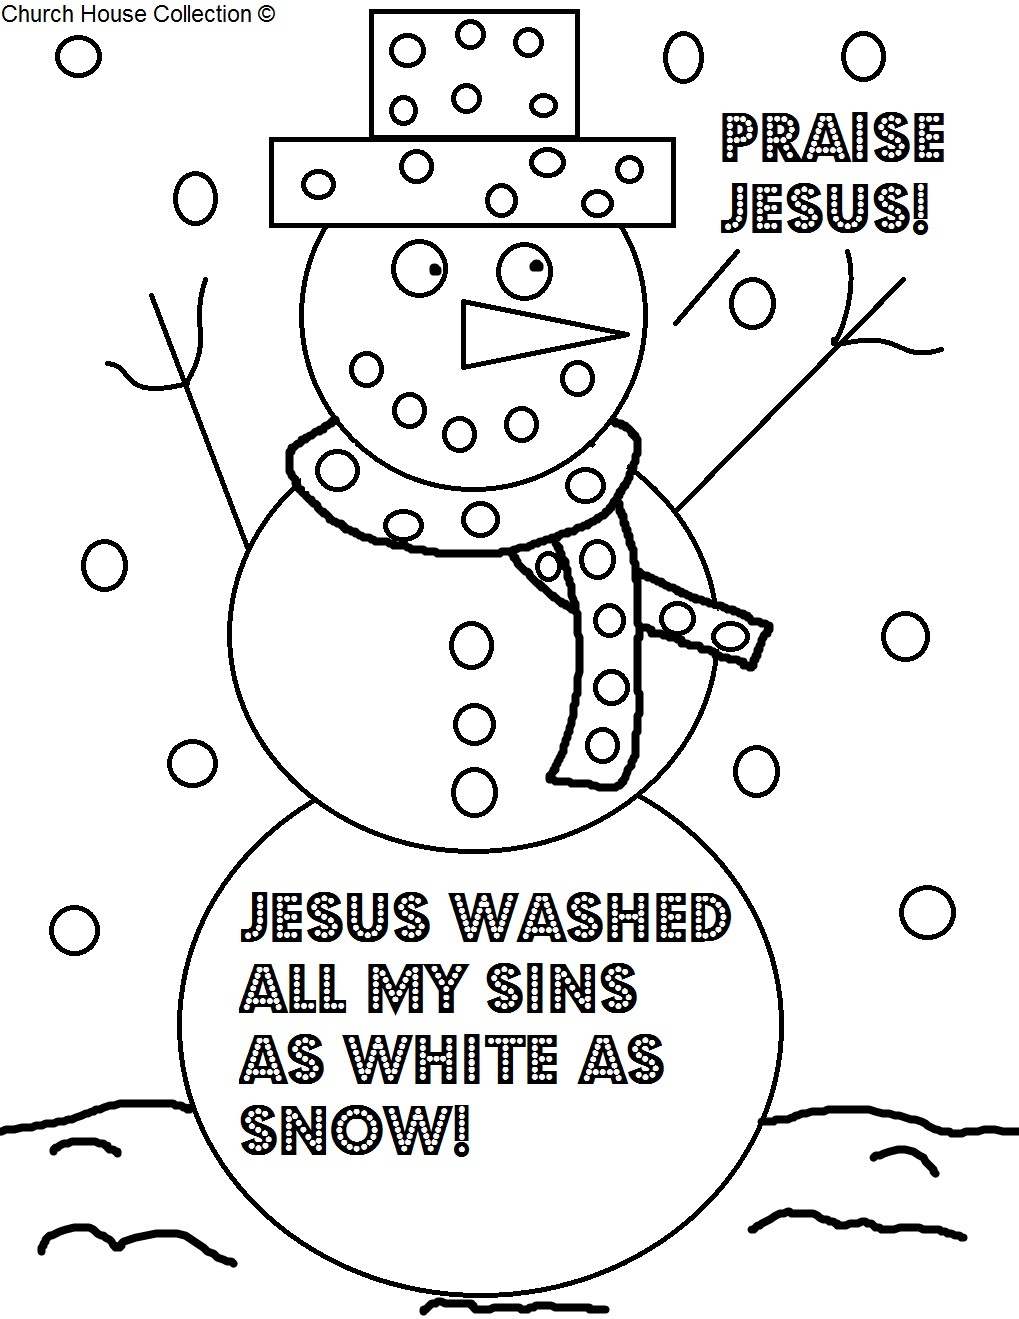 Coloring Book World ~ Staggering Christian Christmas Coloringes - Free Printable Bible Christmas Coloring Pages